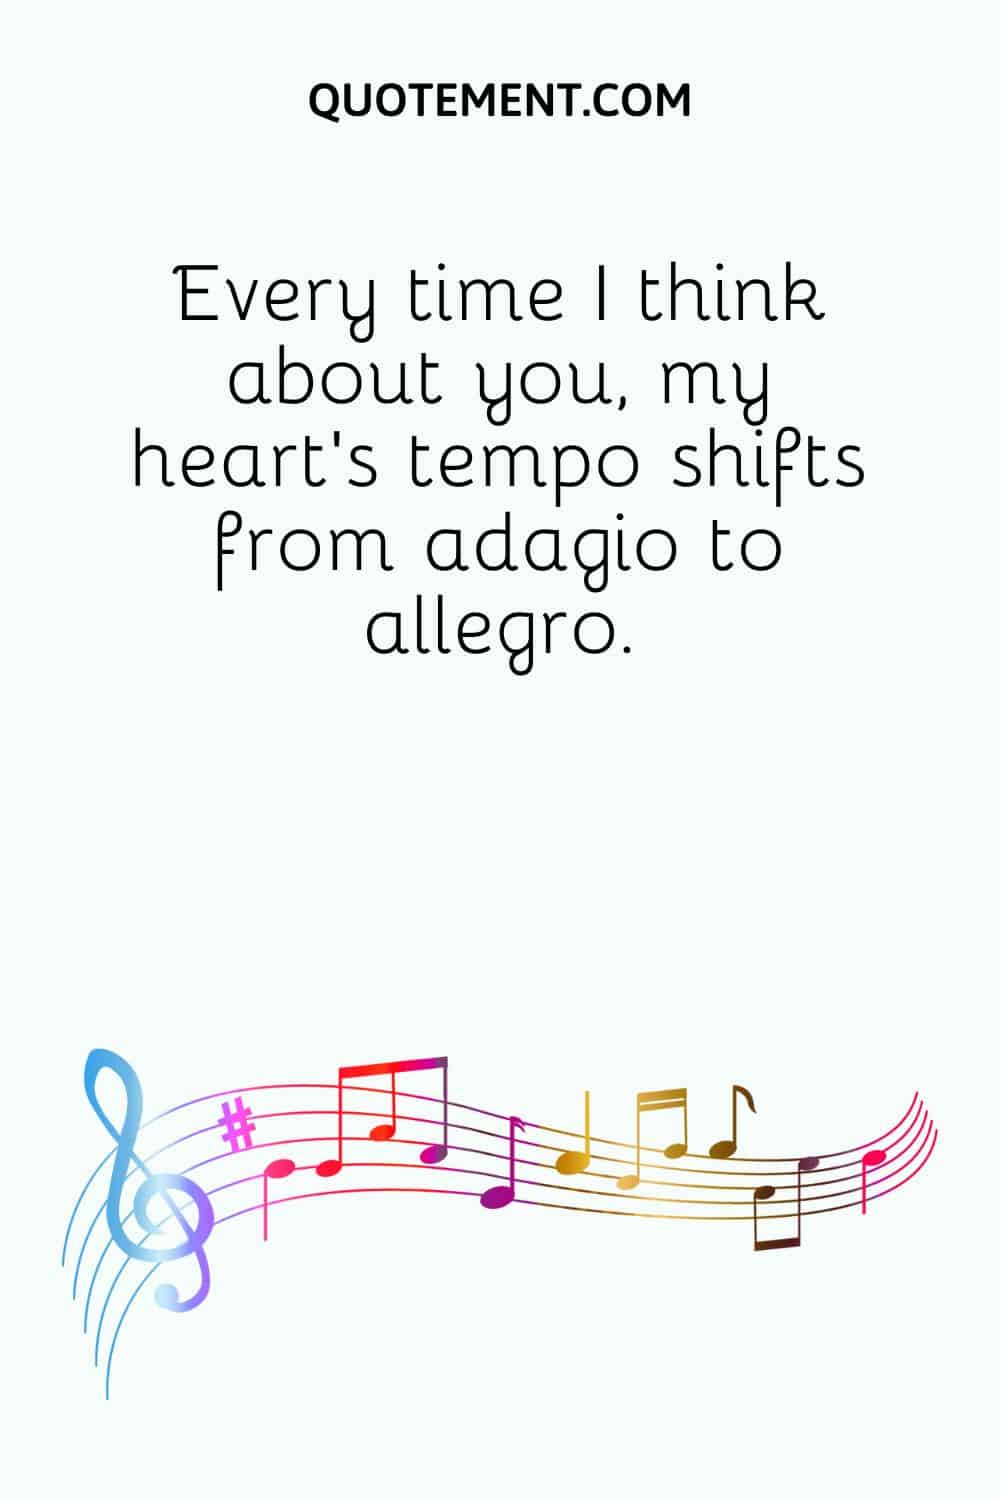 Every time I think about you, my heart’s tempo shifts from adagio to allegro